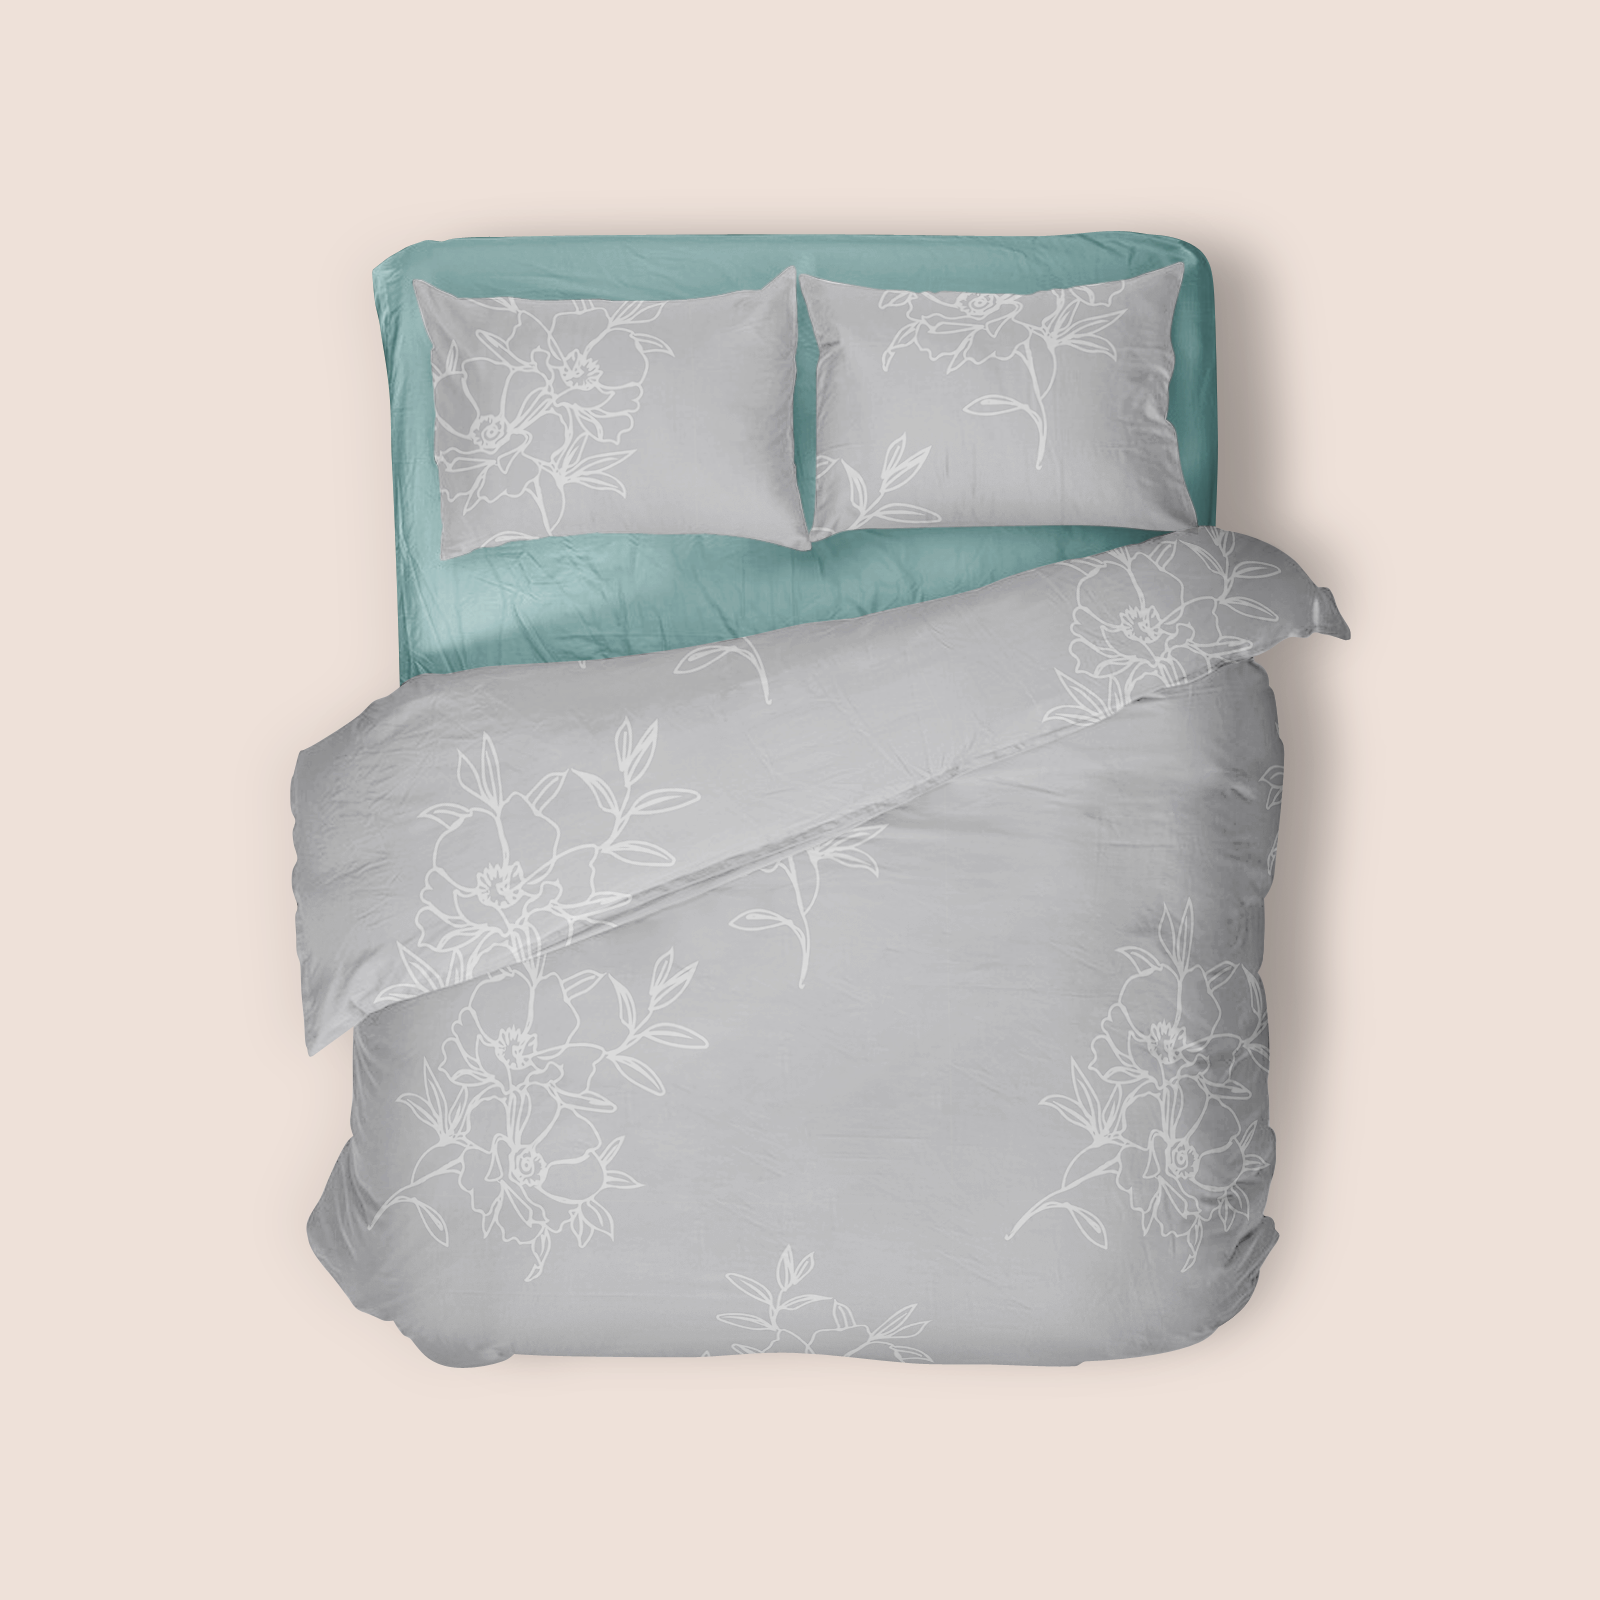 Floral dream pastel in grey pattern design printed on recycled fabric bed mockup